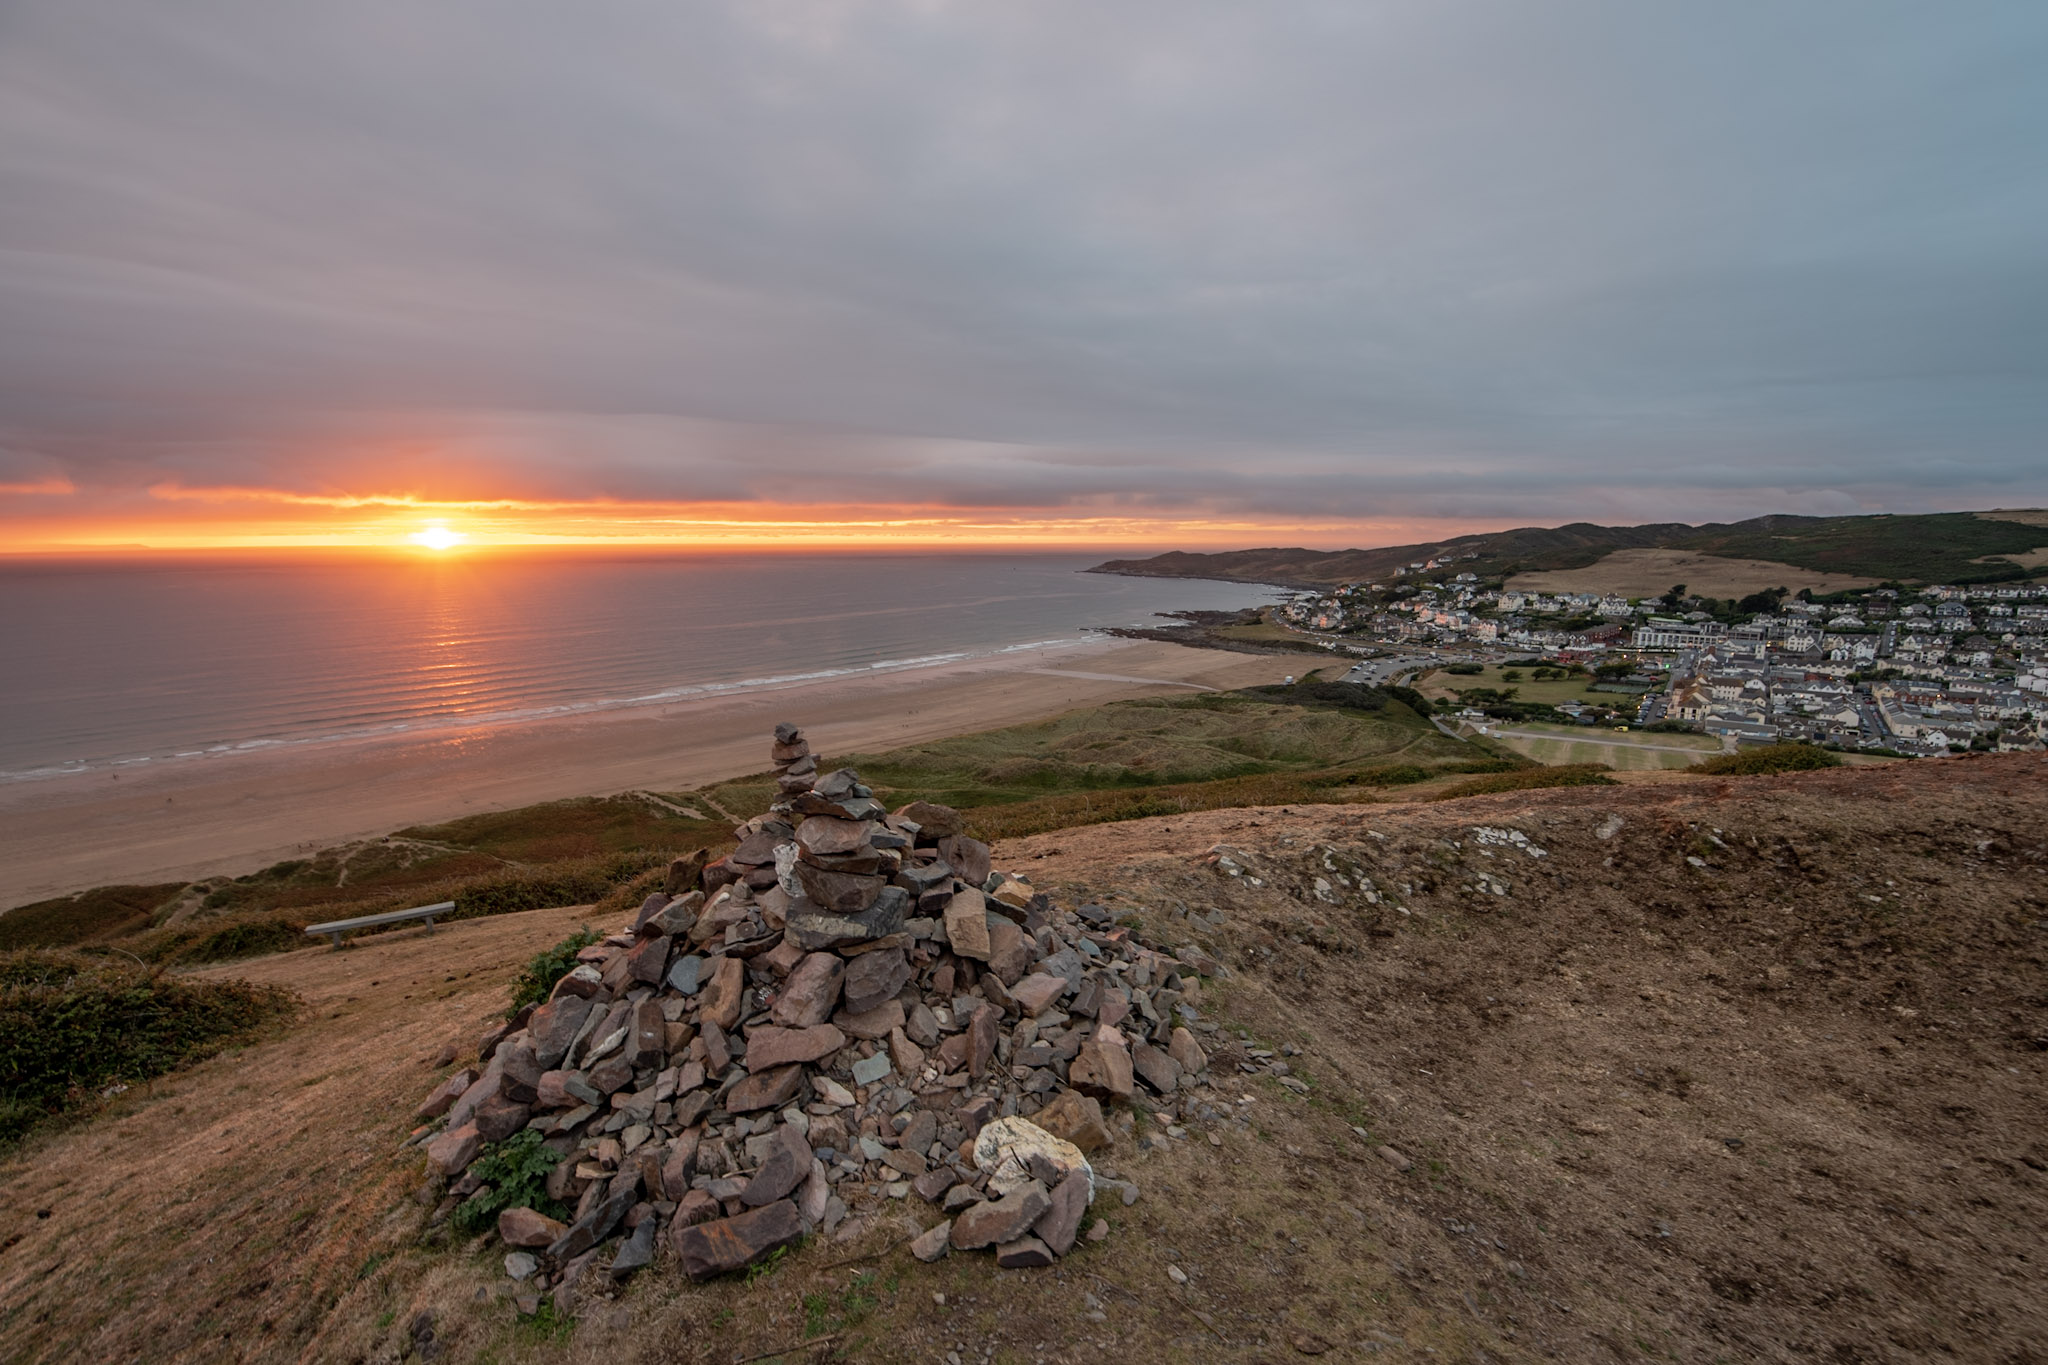 Sunset sea view from local landmark Mini Mountain in Woolacombe